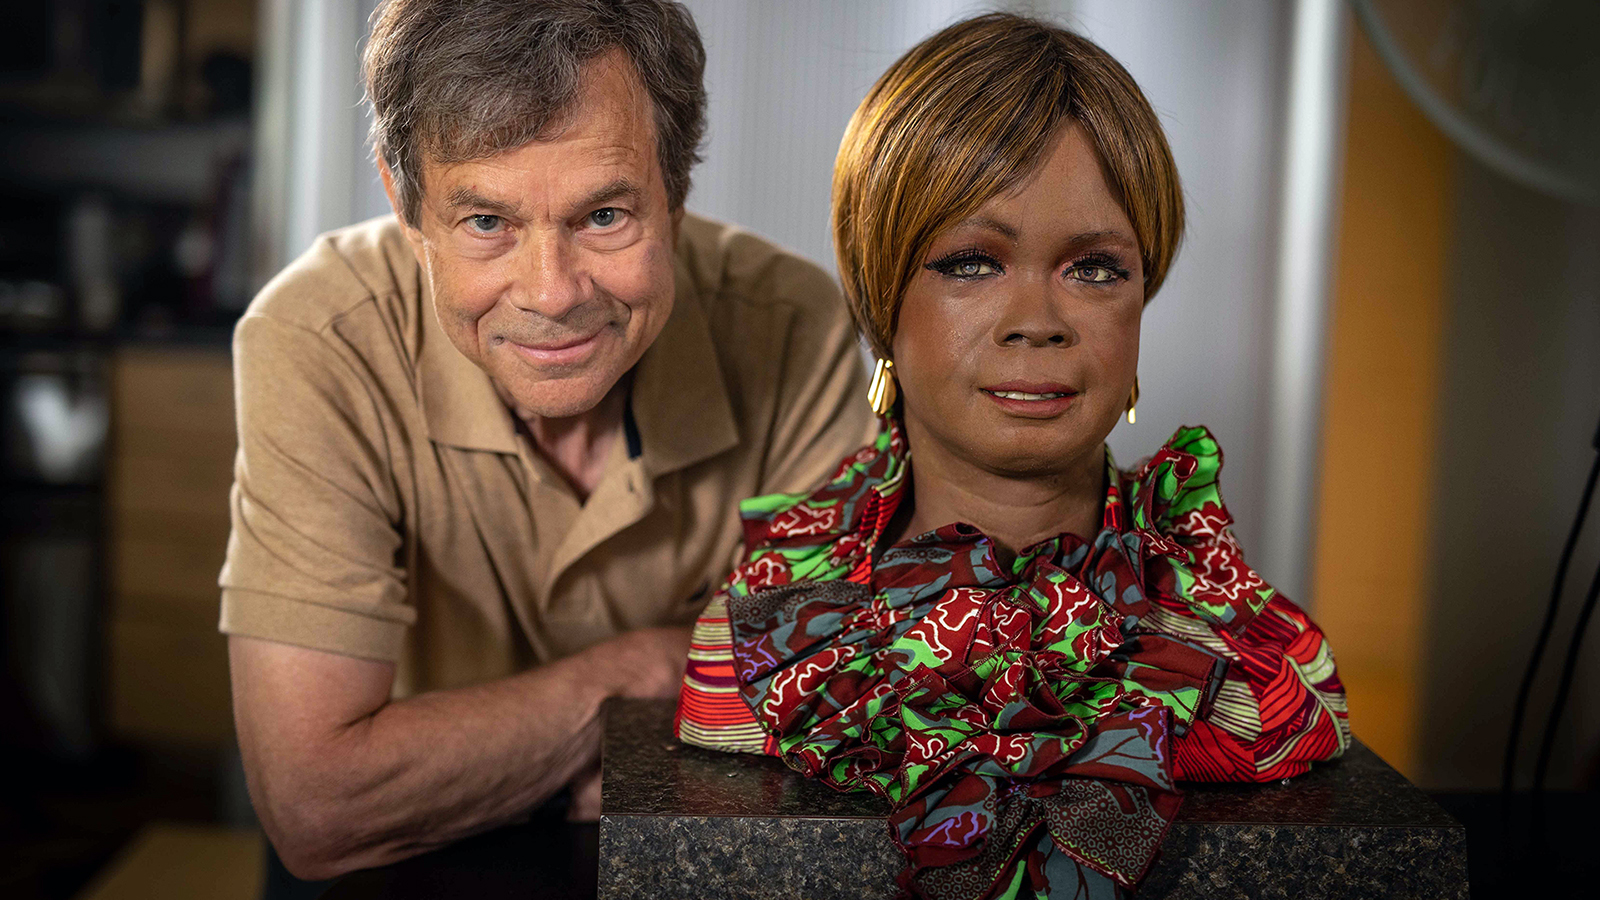 Alan Lightman, left, meets Bina48, one of Earth’s most advanced humanoid robots and one of the few African-American AIs on "SEARCHING: Our Quest for Meaning in the Age of Science." Photo courtesy of SEARCHING